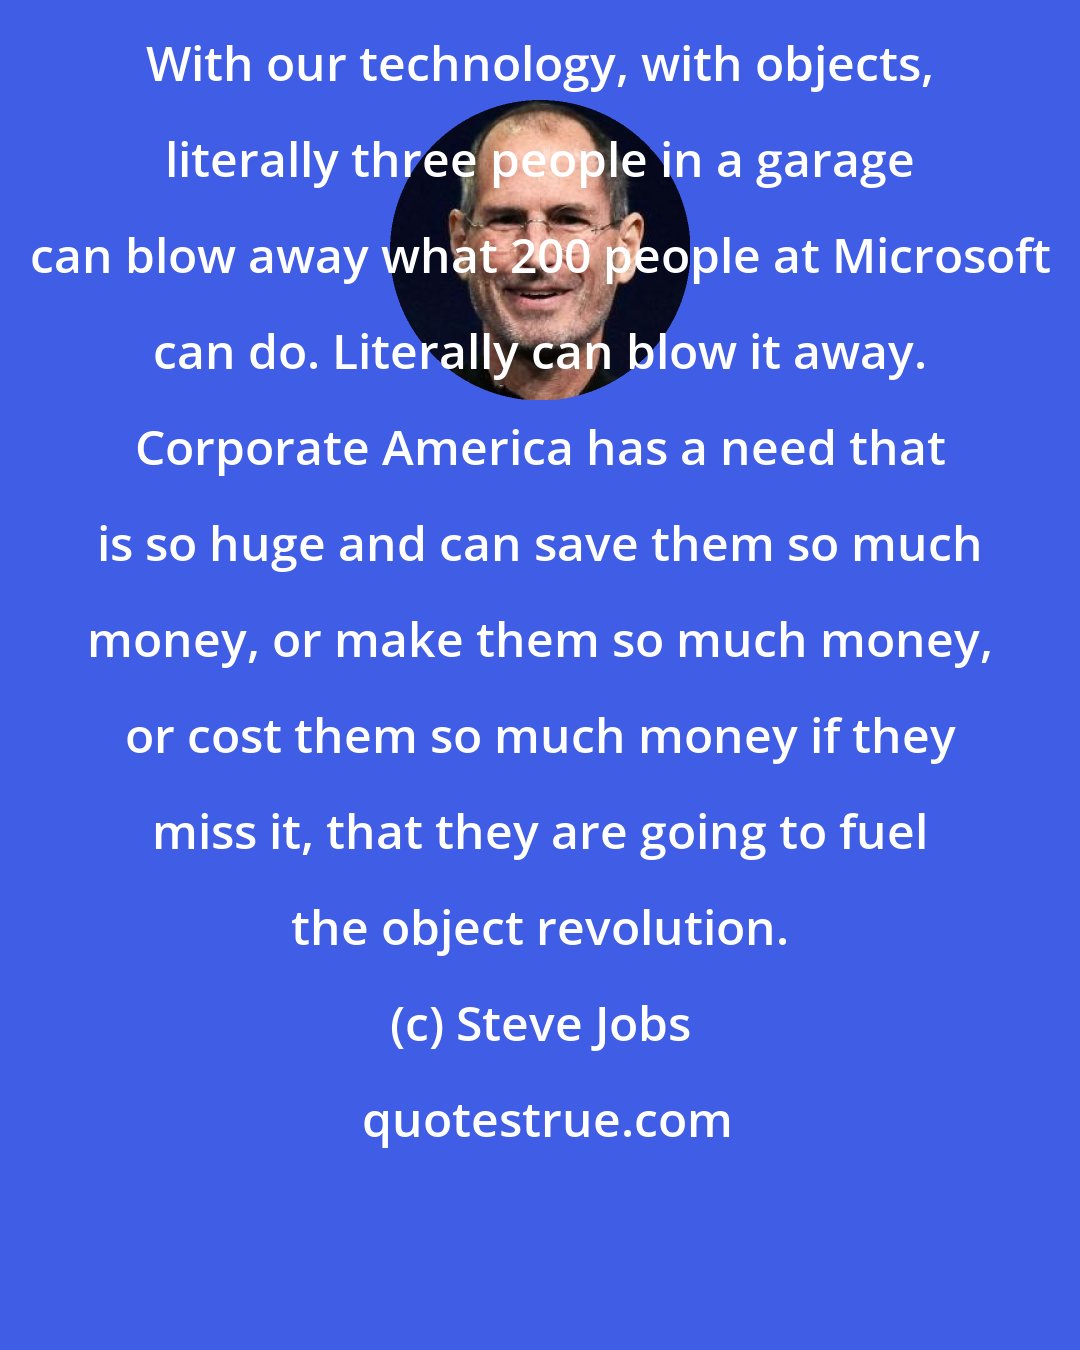 Steve Jobs: With our technology, with objects, literally three people in a garage can blow away what 200 people at Microsoft can do. Literally can blow it away. Corporate America has a need that is so huge and can save them so much money, or make them so much money, or cost them so much money if they miss it, that they are going to fuel the object revolution.